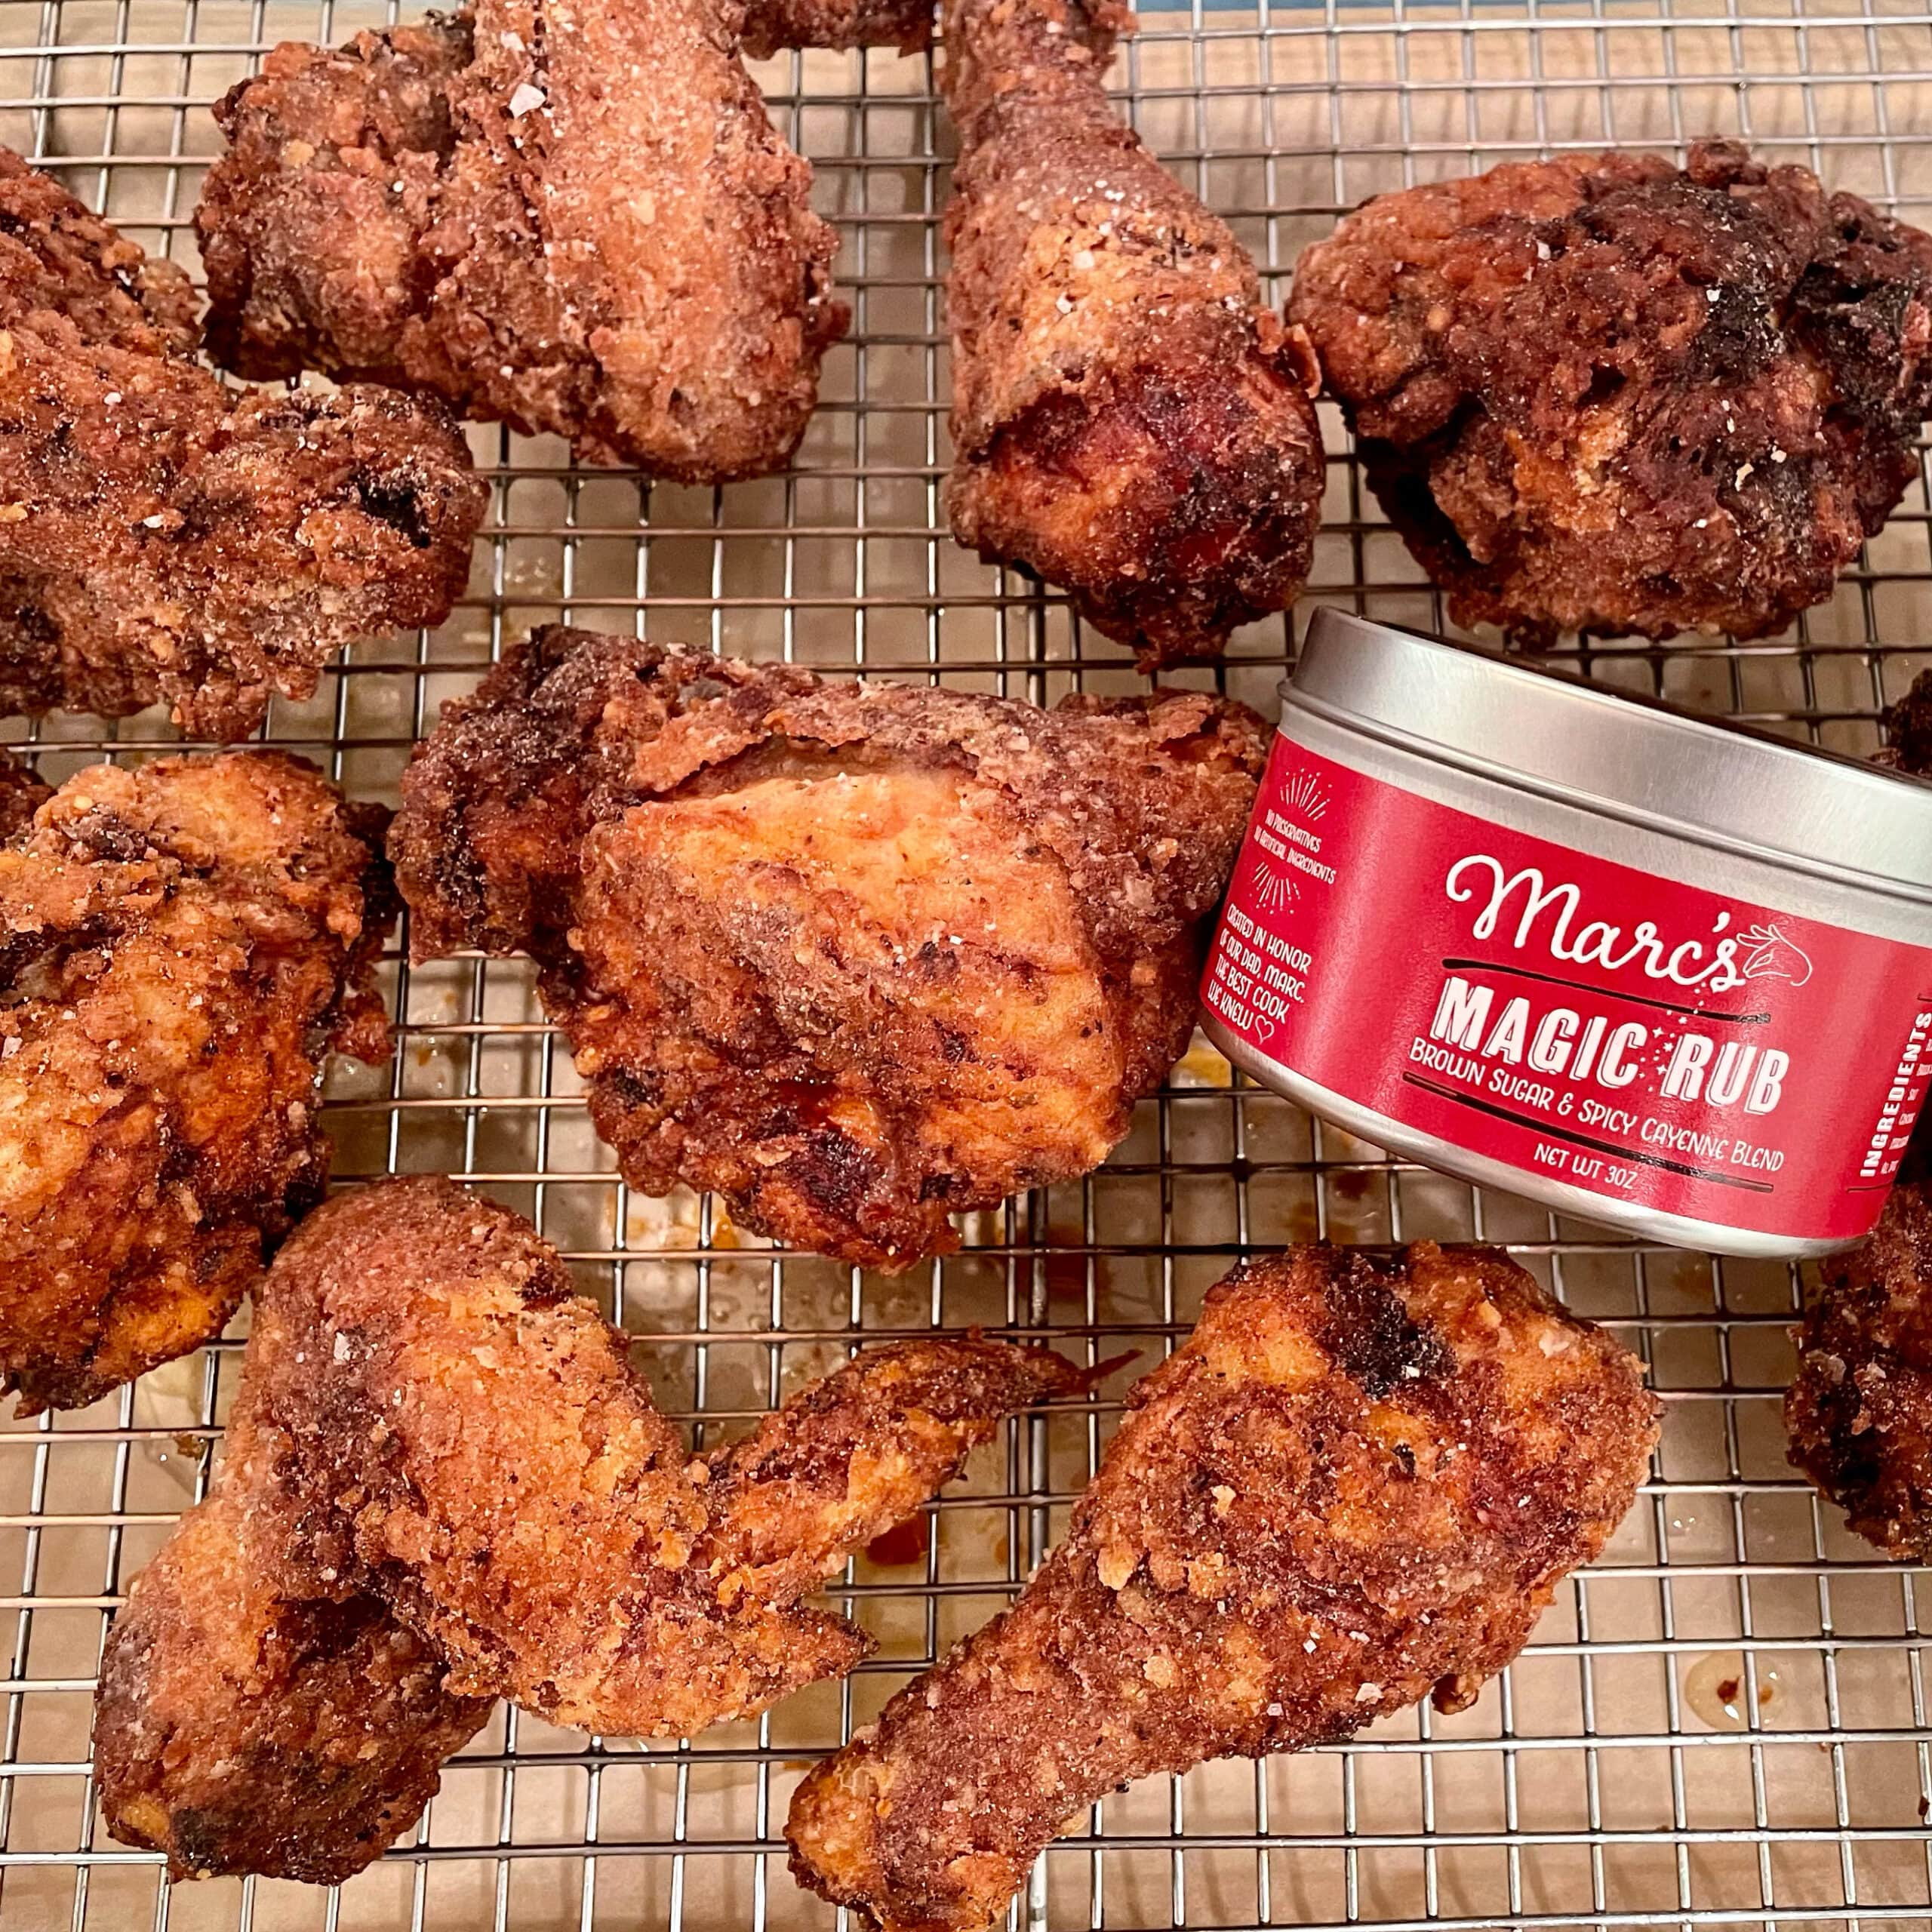 Perfect Fried Chicken